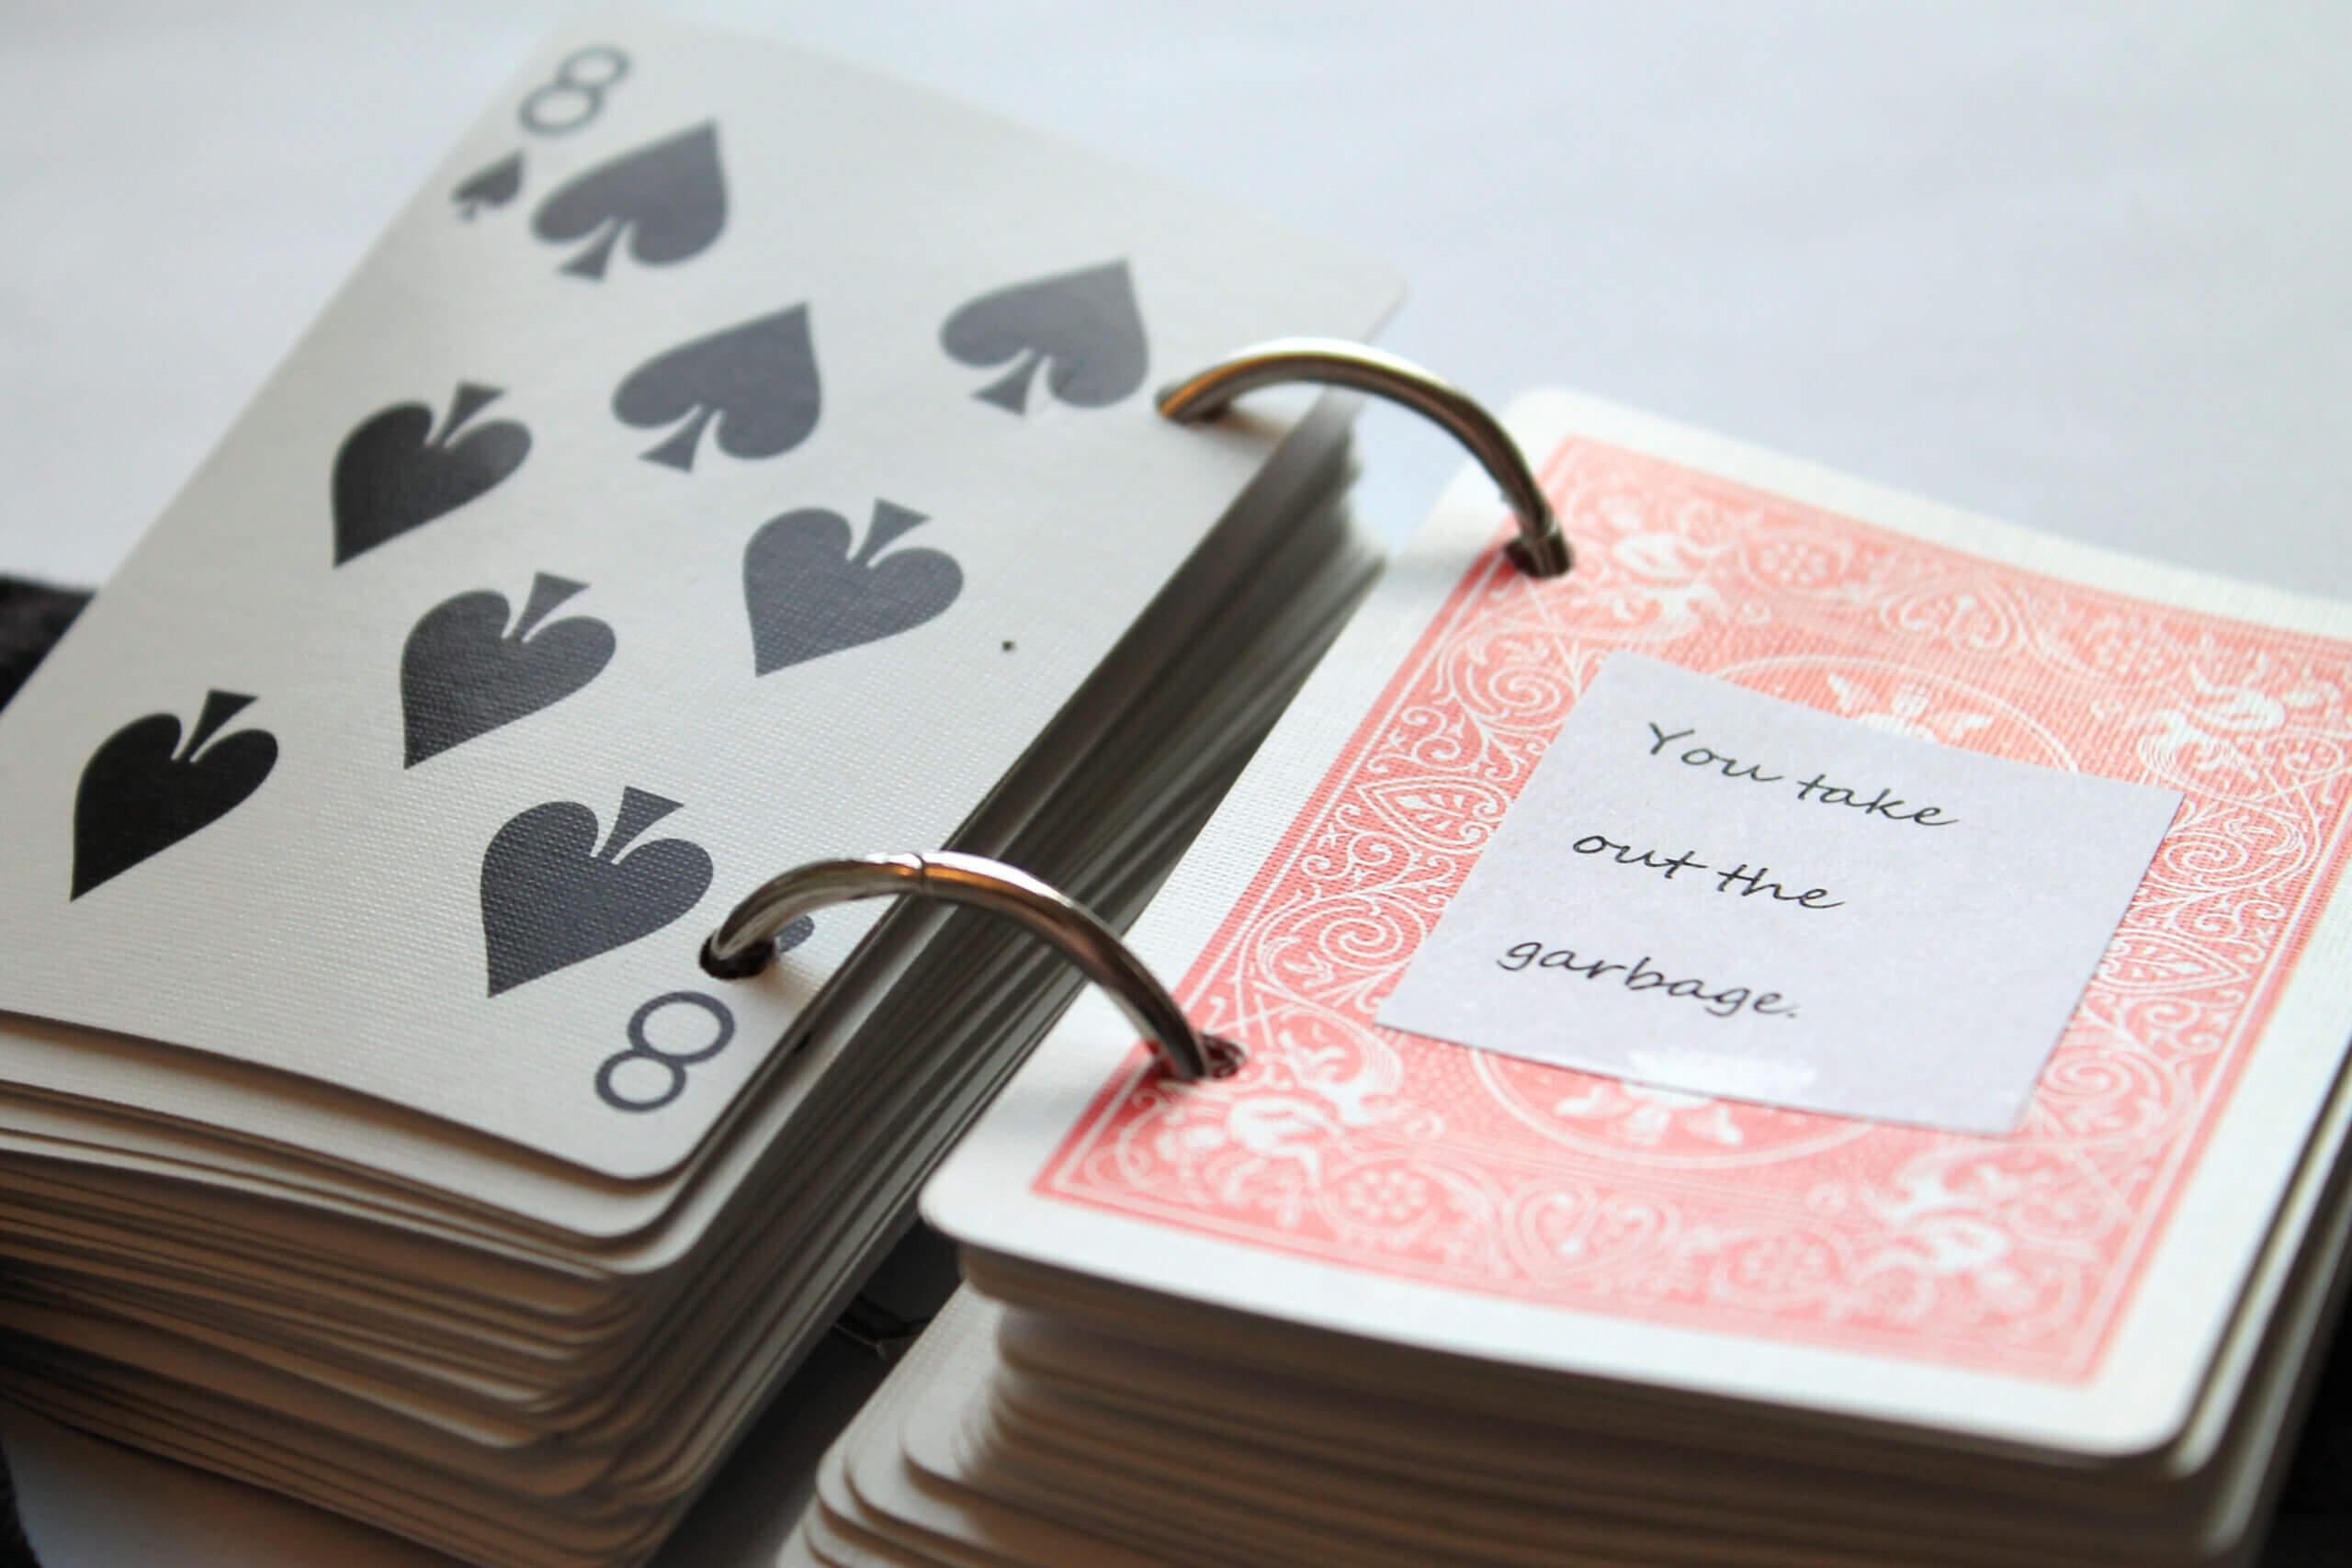 52 Reasons I Love You – Playing Card Book Tutorial Intended For 52 Reasons Why I Love You Cards Templates